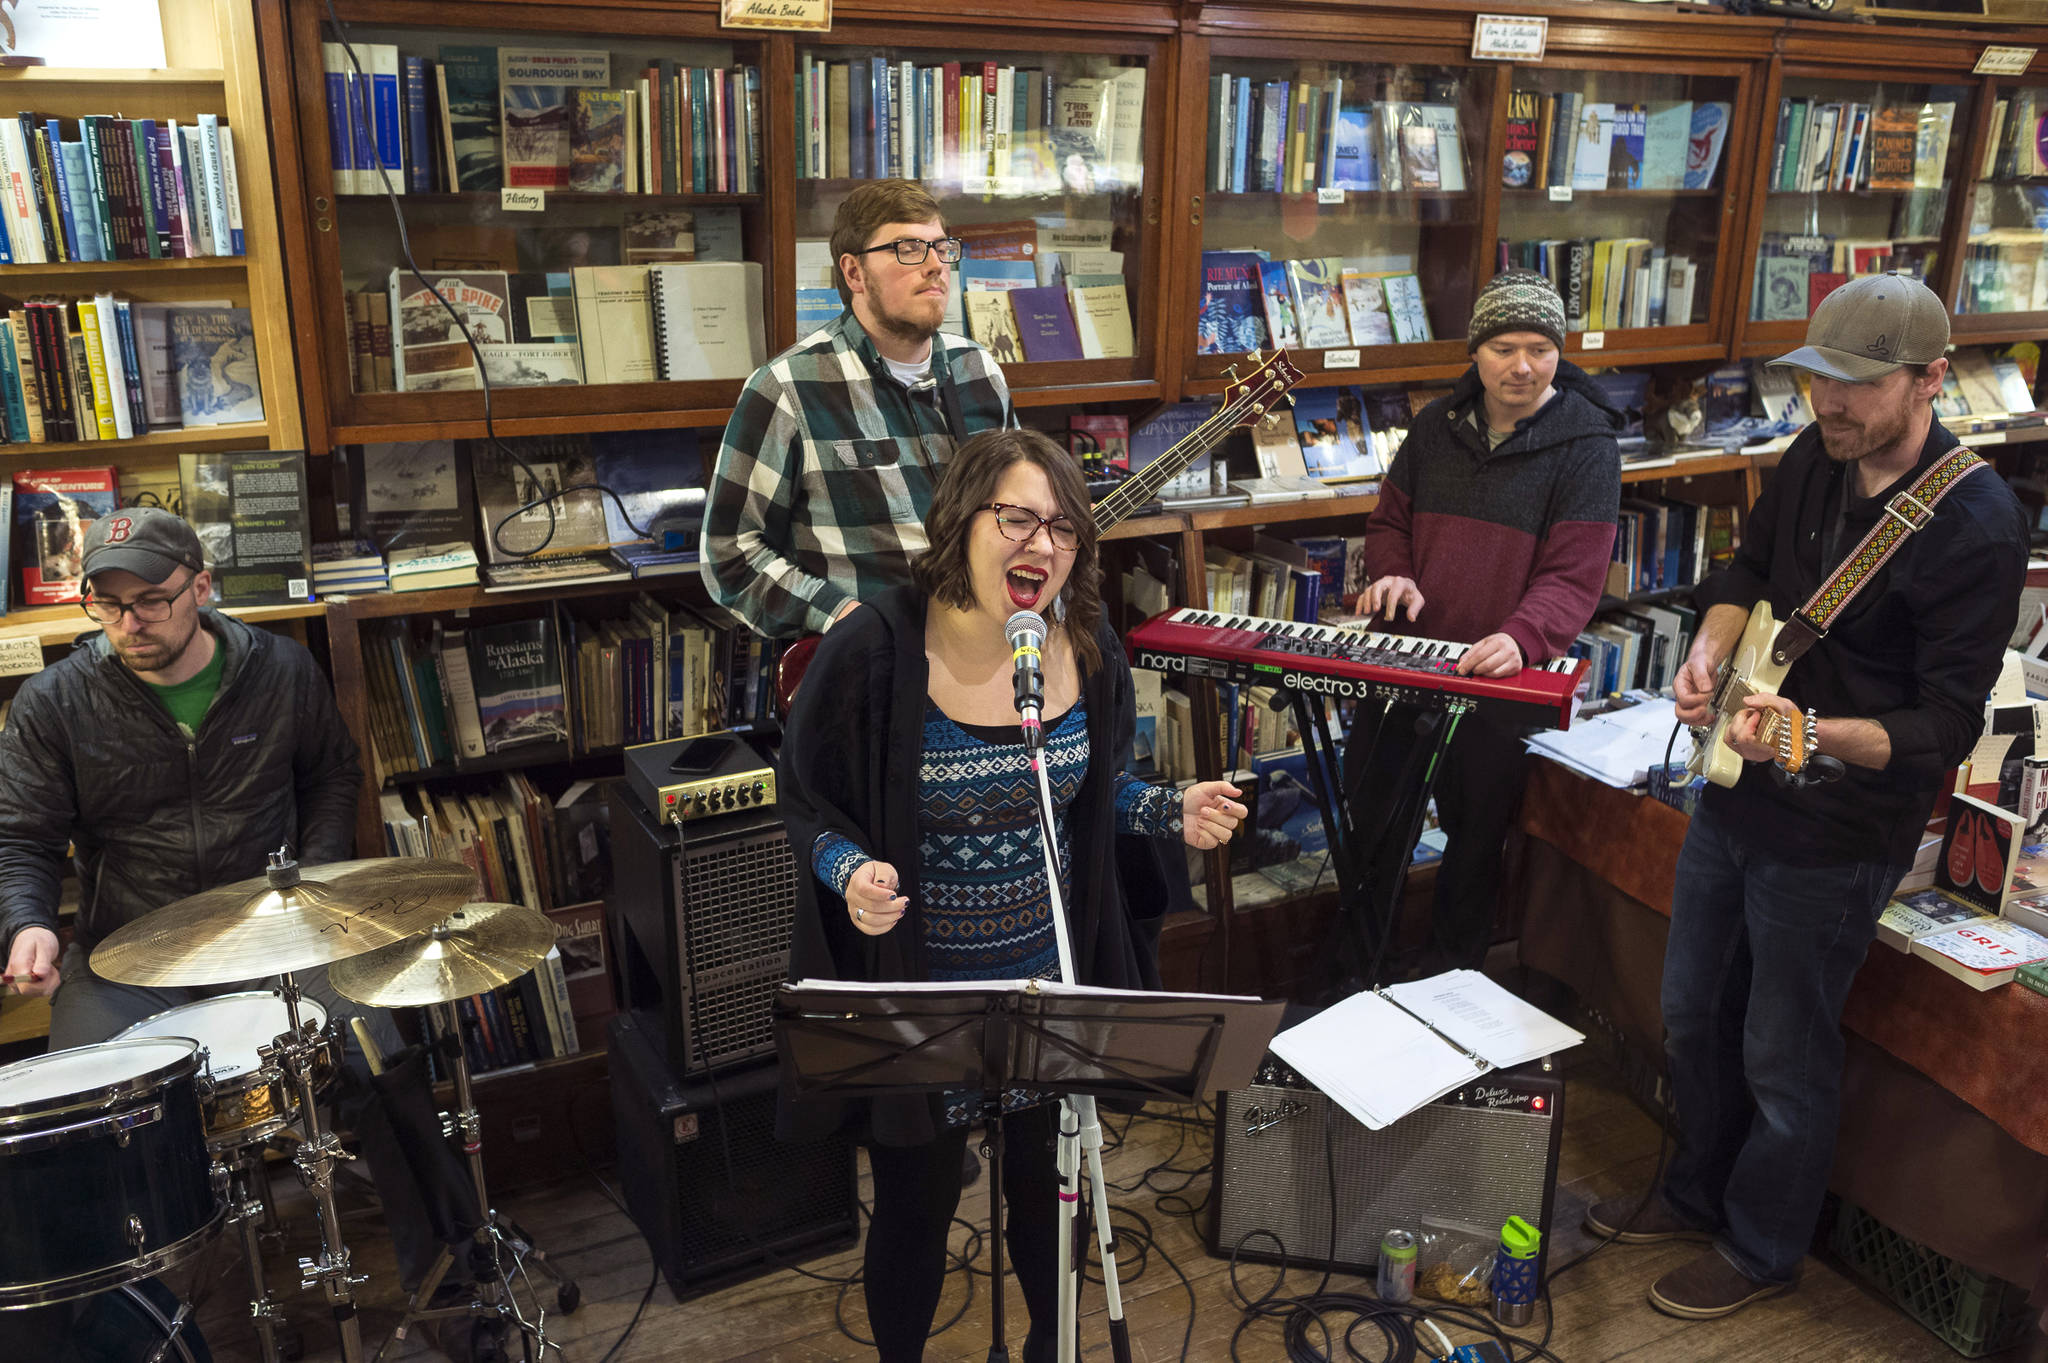 The Flustered Cluckers perform at Rainy Retreat Books during Gallery Walk on Friday, Dec. 7, 2018. (Michael Penn | Juneau Empire)